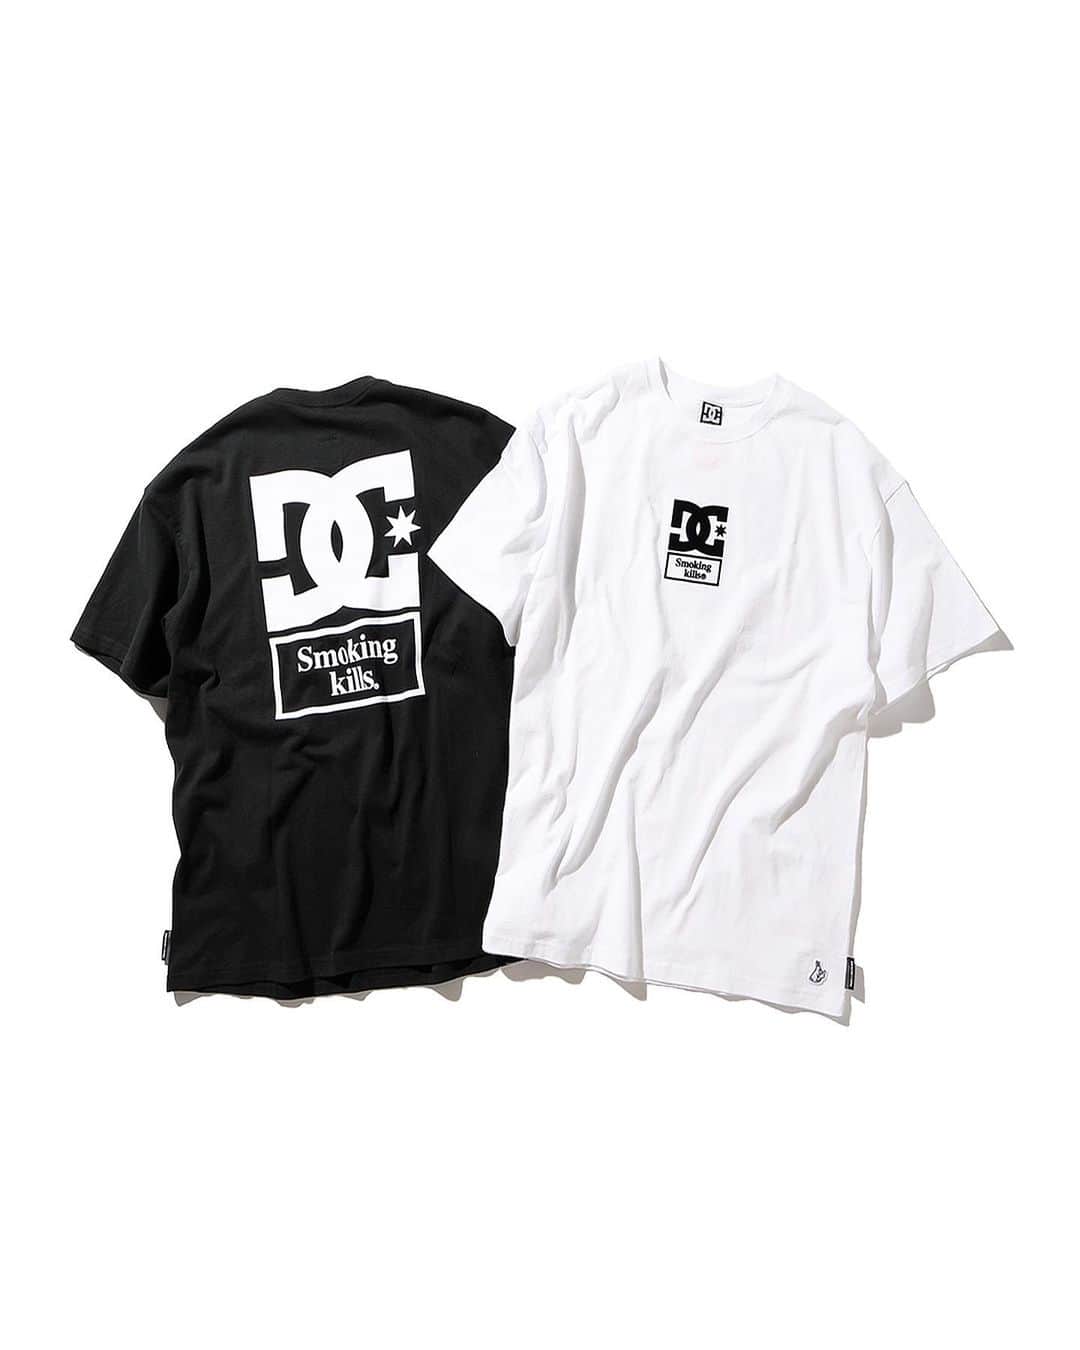 #FR2さんのインスタグラム写真 - (#FR2Instagram)「DC Shoes × #FR2 The COURT GRAFFIK and WILLIAMS SLIM sneakers will be on sale on Saturday January 23, along with other apparel items.There will be five items in total: a T-shirt with a limited collaboration logo, a matching jacket and pants set, a bucket hat with an all-over logo, and a backpack.The lineup has a great street design in classic DC style. *The sale time on @________gr8 ONLINE has changed from 10am to 9am.  DC Shoes × #FR2 “COURT GRAFFIK”“WILLIAMS SLIM”のスニーカー2型に加えアパレル商品も同時に1月23日(土)発売します。コラボレーション限定ロゴのTシャツに、セットアップでも着用できるジャケットとパンツ、総柄ロゴのバケットハット、BAGPACKの計5型のDCらしいストリート感溢れるラインナップです。 ※@________gr8 ONLINEでの発売時間が午前10時から午前9時に変更となっております。  DC Shoes × #FR2 除了「COURT GRAFFIK」與「WILLIAMS SLIM」這兩款運動鞋外我們還會在1月23日（六）同時推出服飾類商品。 而且也可以和合作活動限定商標的襯衫搭配著一起穿著商品類型包括夾克、褲裝、整面商標花紋的漁夫帽與背包等，總共有5種。商品內容滿溢著相當具DC風格的街頭感。 關於在※@________gr8 ONLINE的發售時間 目前已經從早上10點變更為早上9點。  DC Shoes × #FR2 “COURT GRAFFIK”“WILLIAMS SLIM” 2 款运动鞋和服饰商品同时将于 1 月 23 日（六）开始发售。有联名限定商标的 T 恤，和可与之搭配穿着的夹克衫与短裤、整体商标花纹的渔夫帽、背包共 5 款。产品系列充满 DC 的街头感风格。 ※@________gr8 线上发售的时间 从上午 10 点更改为上午 9 点。  #DCshoes#FR2#fxxkingrabbits#頭狂色情兎  #Smokingkills®︎#caution」1月20日 20時06分 - fxxkingrabbits